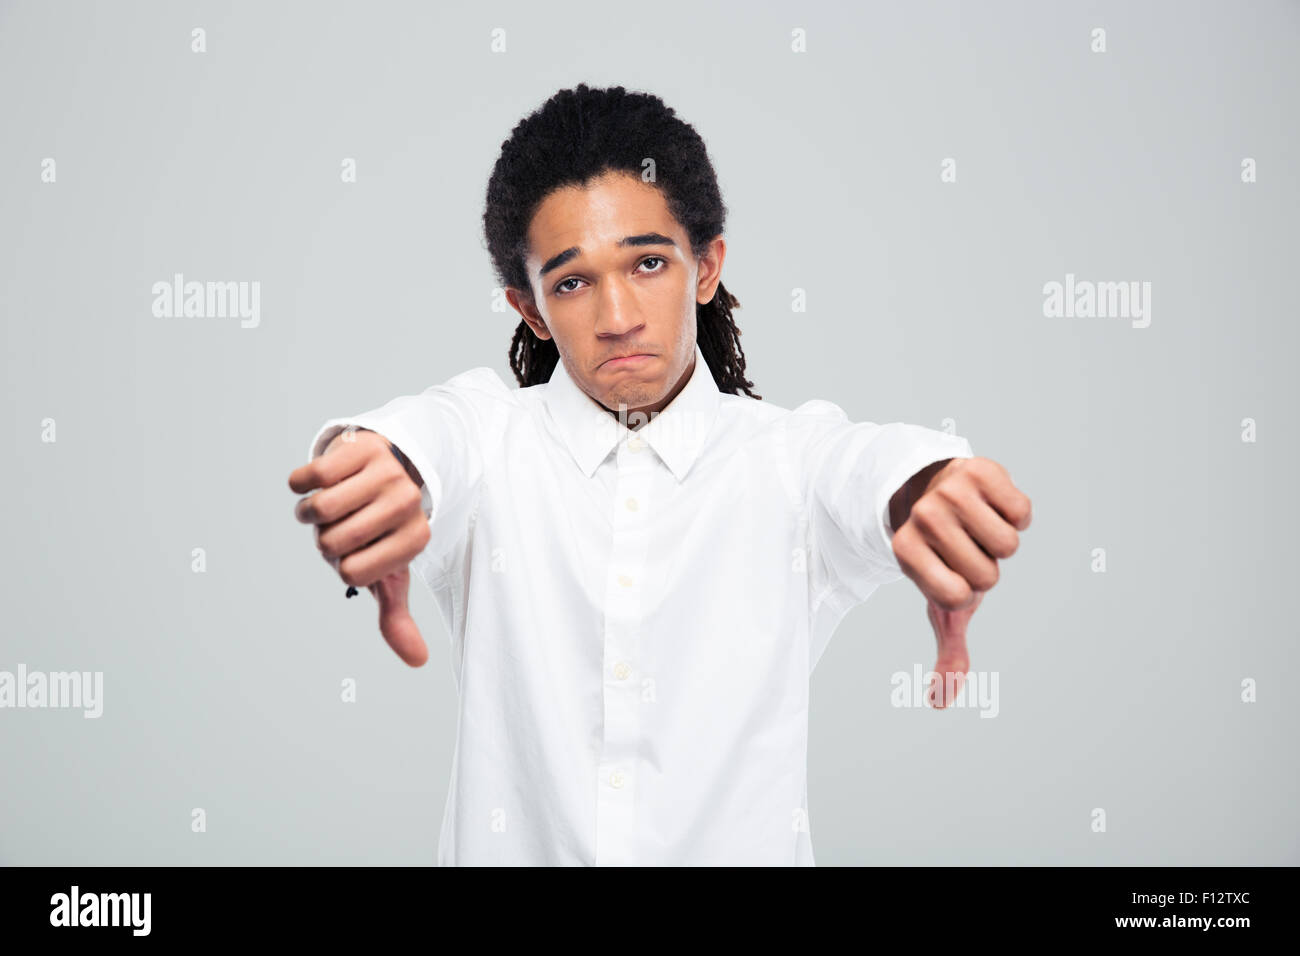 Portrait of a young afro american businessman showing thumbs down over gray background Stock Photo